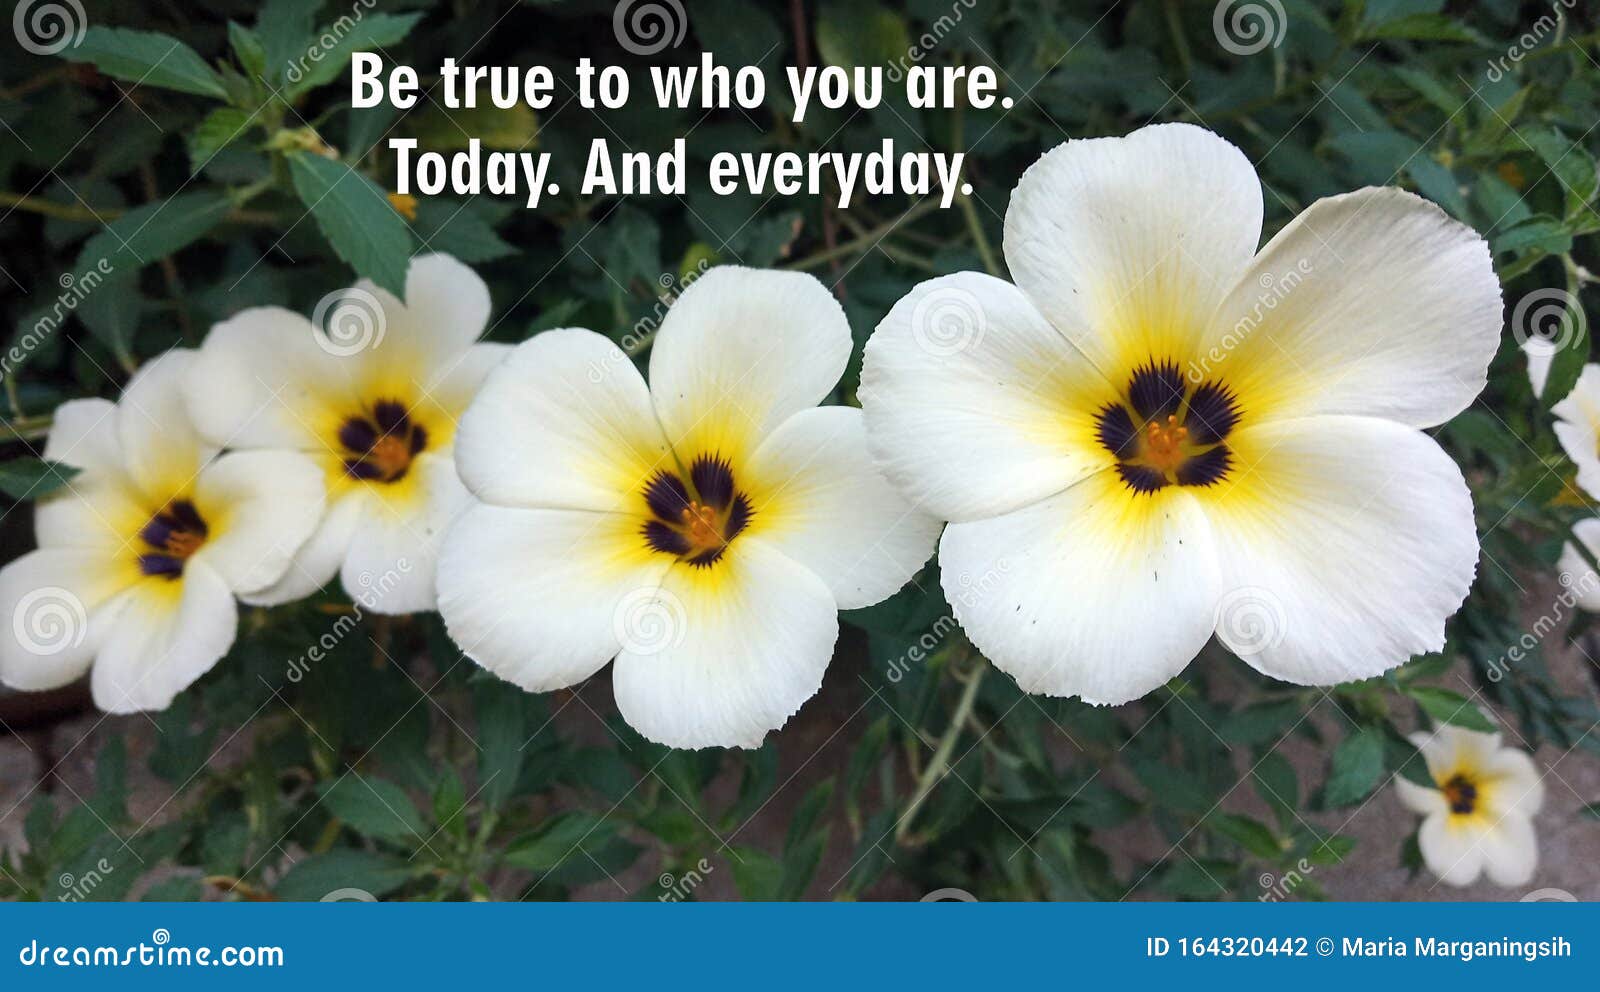 inspirational motivational quote - be true to who you are. today. and everyday. with white flowers background.